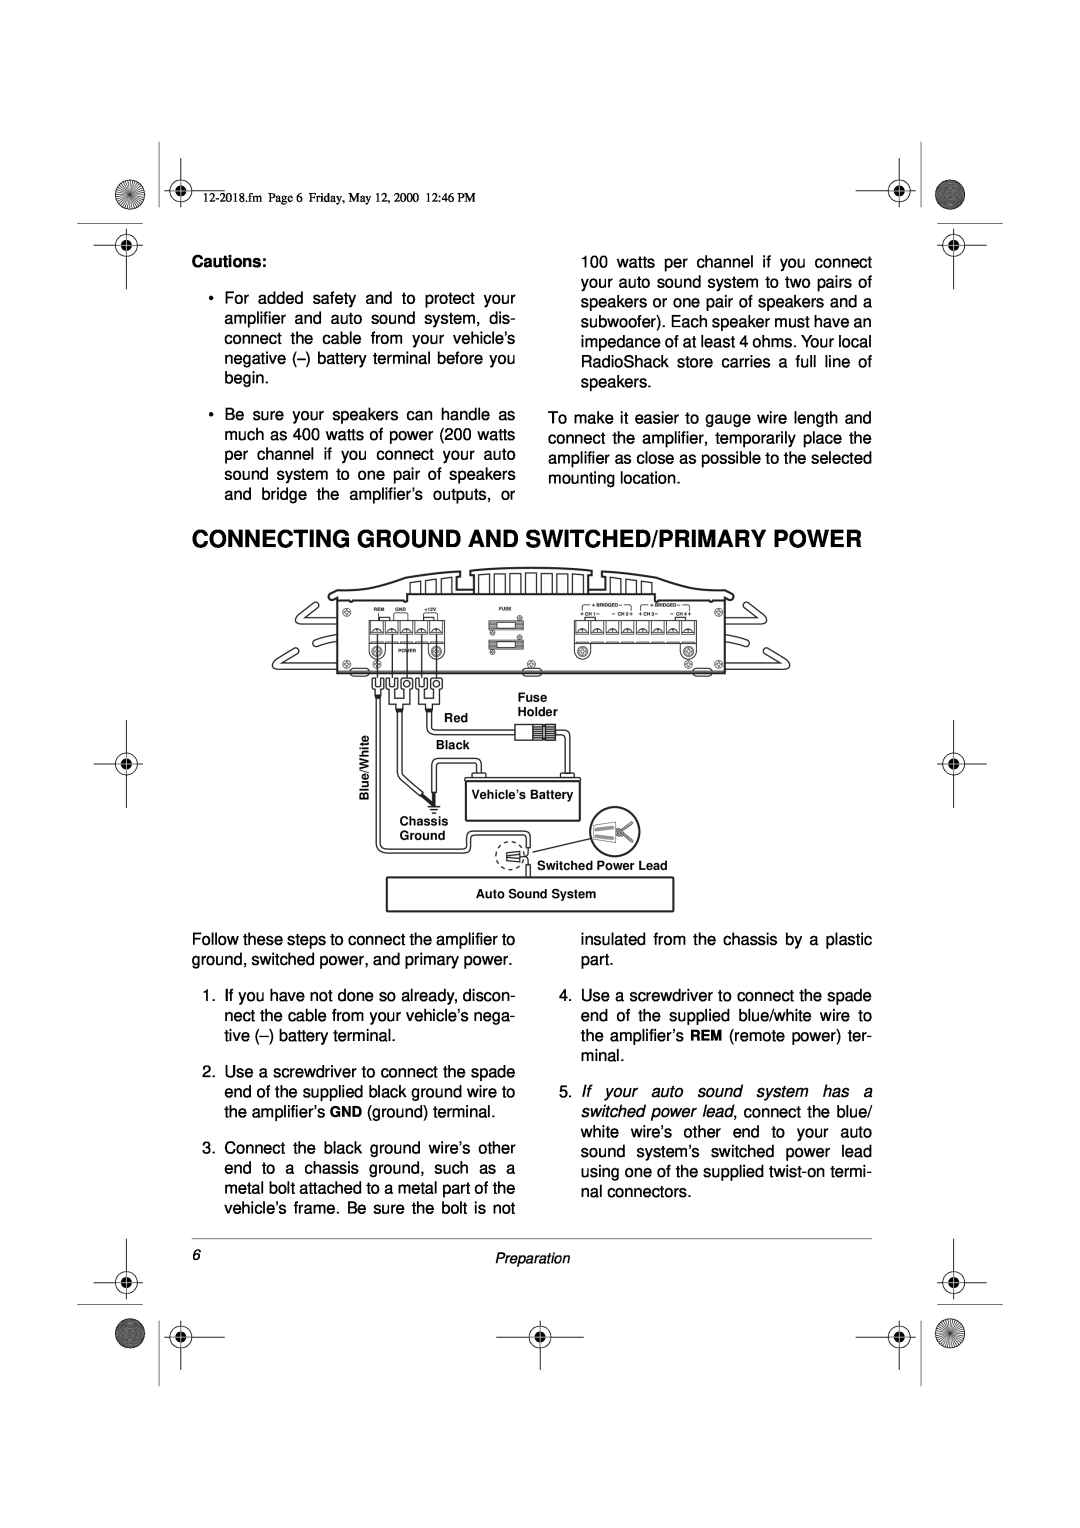 Radio Shack XL-400 owner manual Connecting Ground And Switched/Primary Power, Cautions 